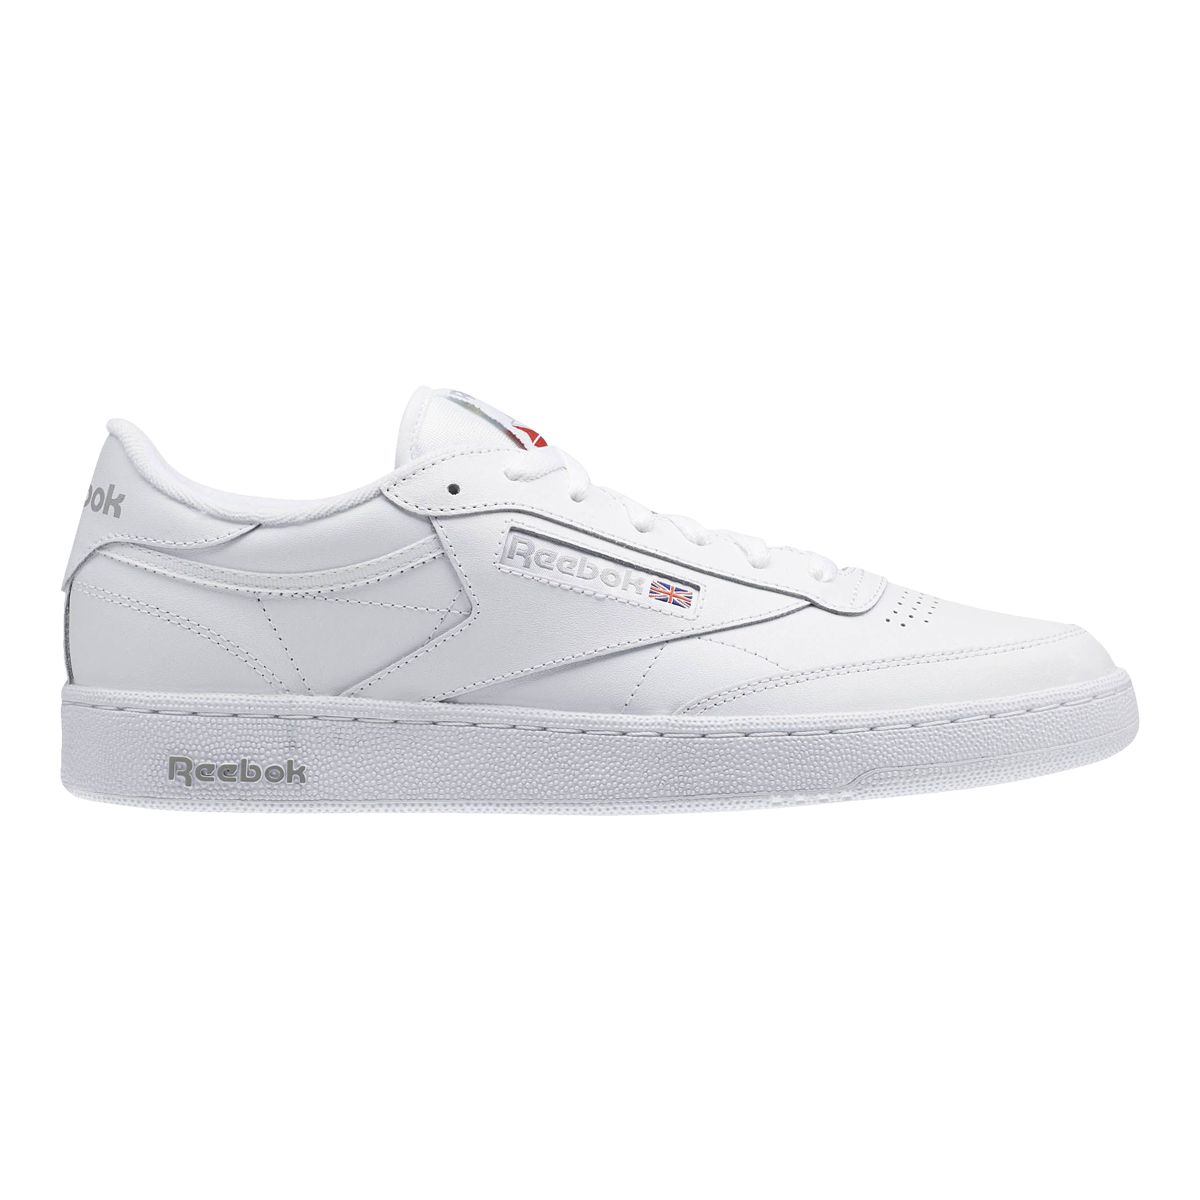 Reebok Men's Club 85 Foundation Shoes  Sneakers Low Top Casual Leather